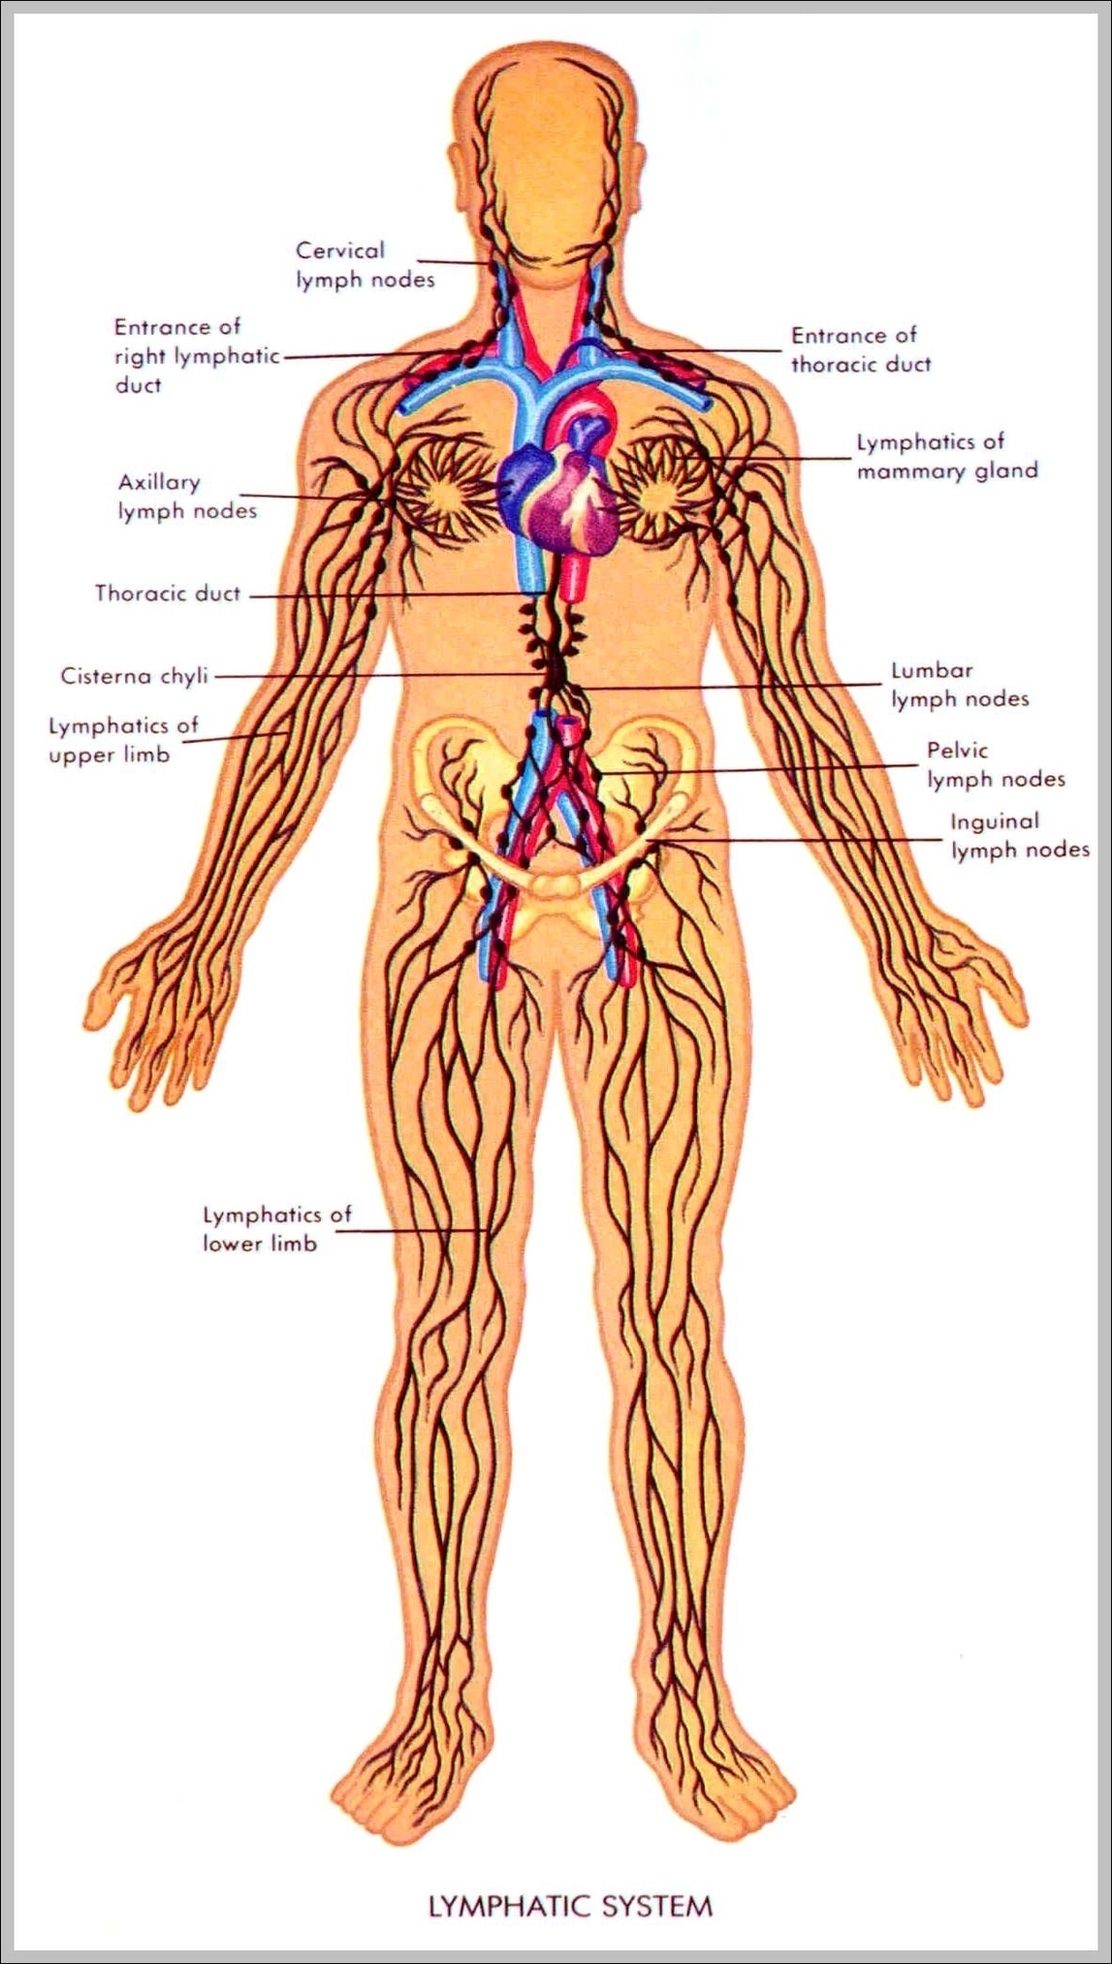 What Is Lymphatic System Image